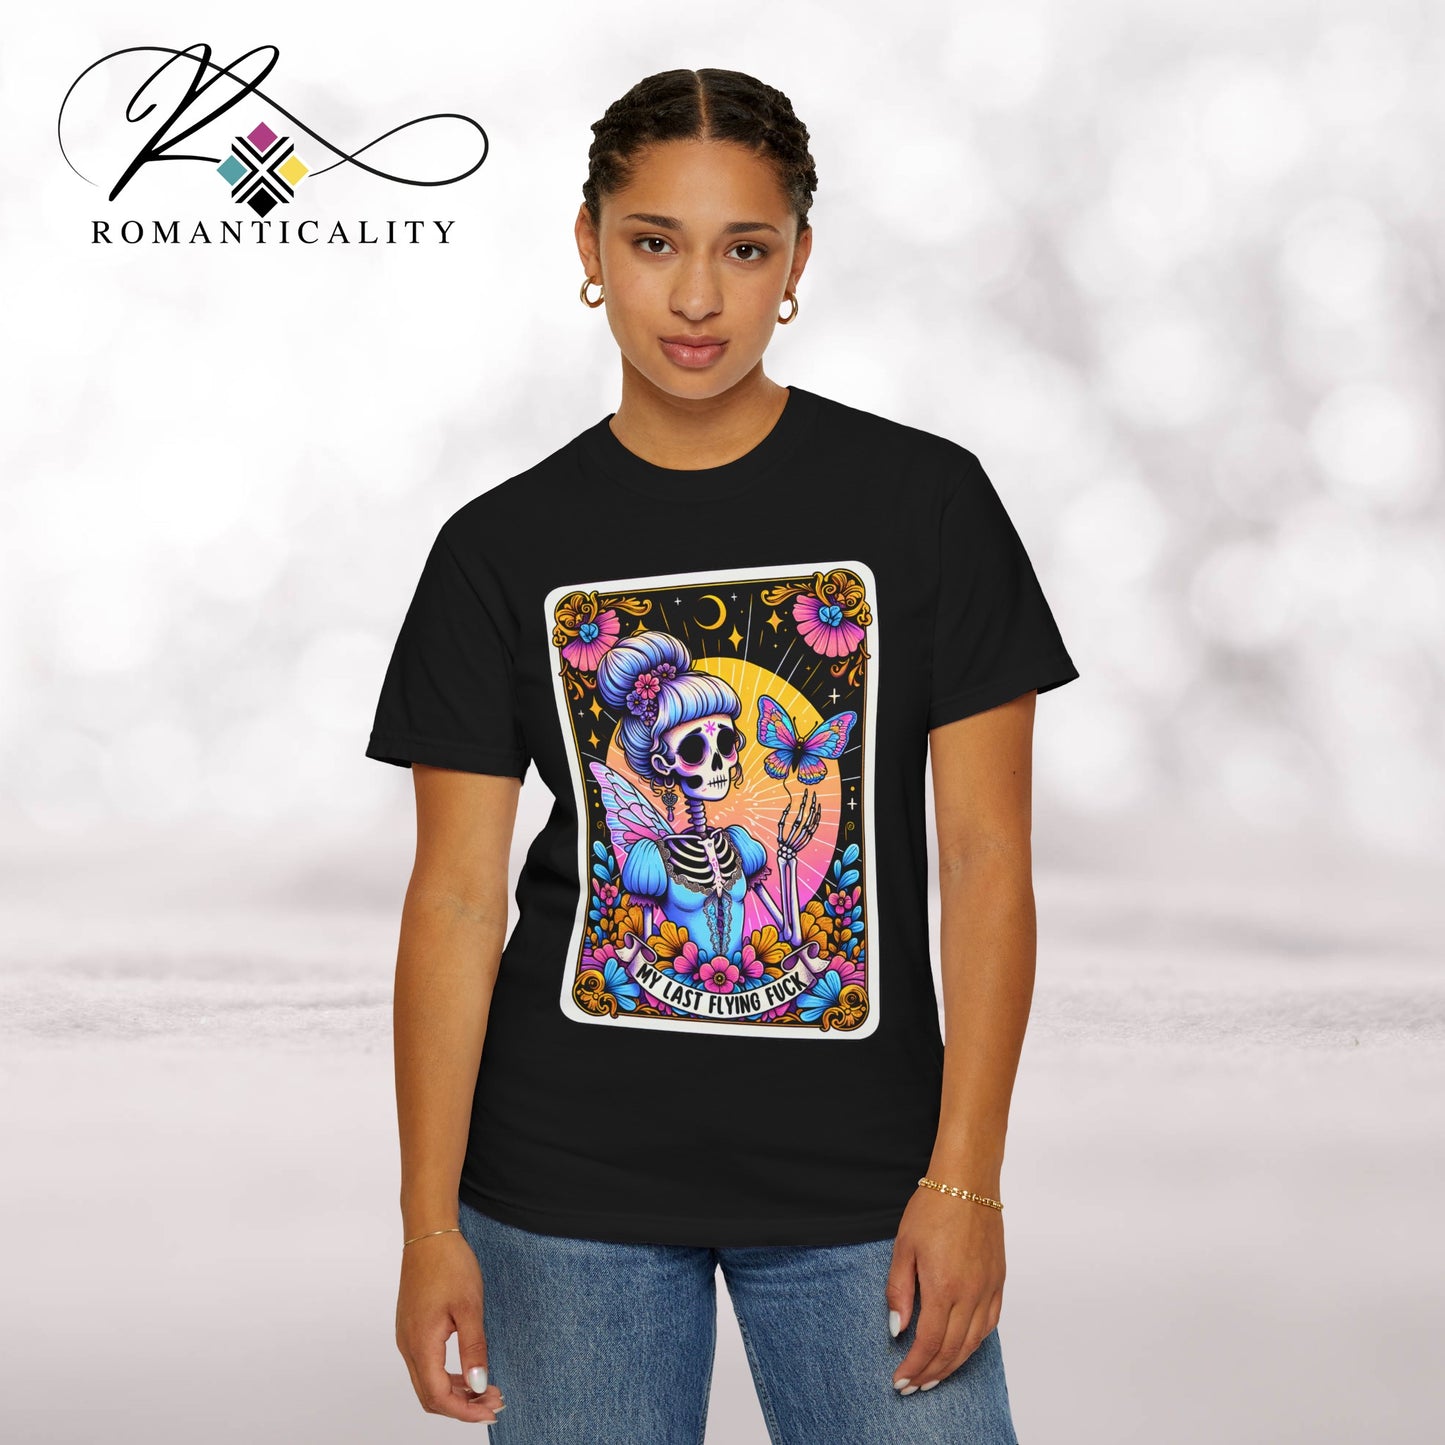 My Last Flying F-Tarot Graphic T-Shirt-Humorous Tee-Comfort Colors Graphic Tee-Unisex Graphic Tee-Tarot Card Graphic T-shirt-Giftful-Gift-Mother's Day